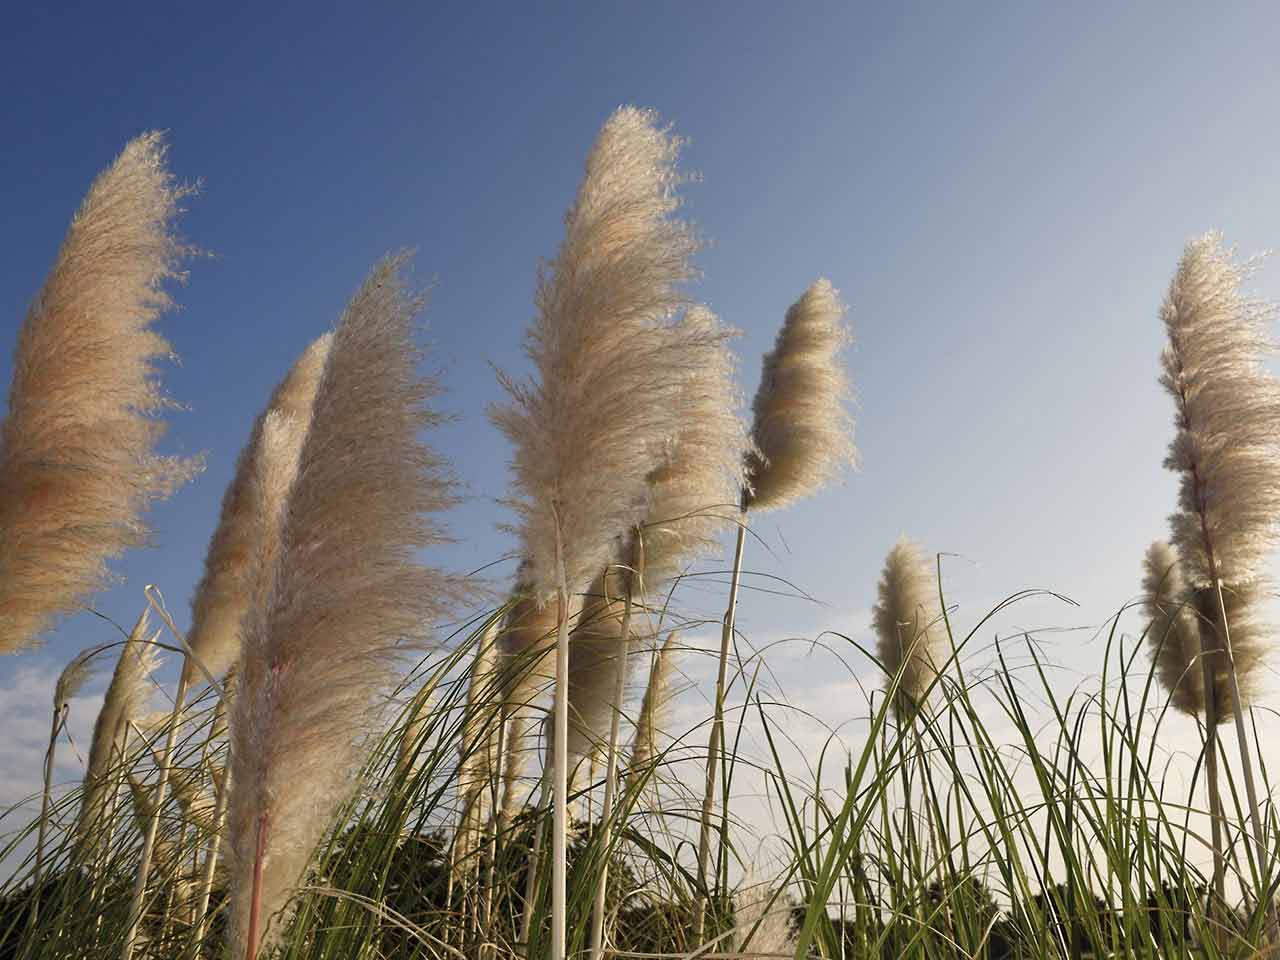 Pampas grass blowing in the breeze